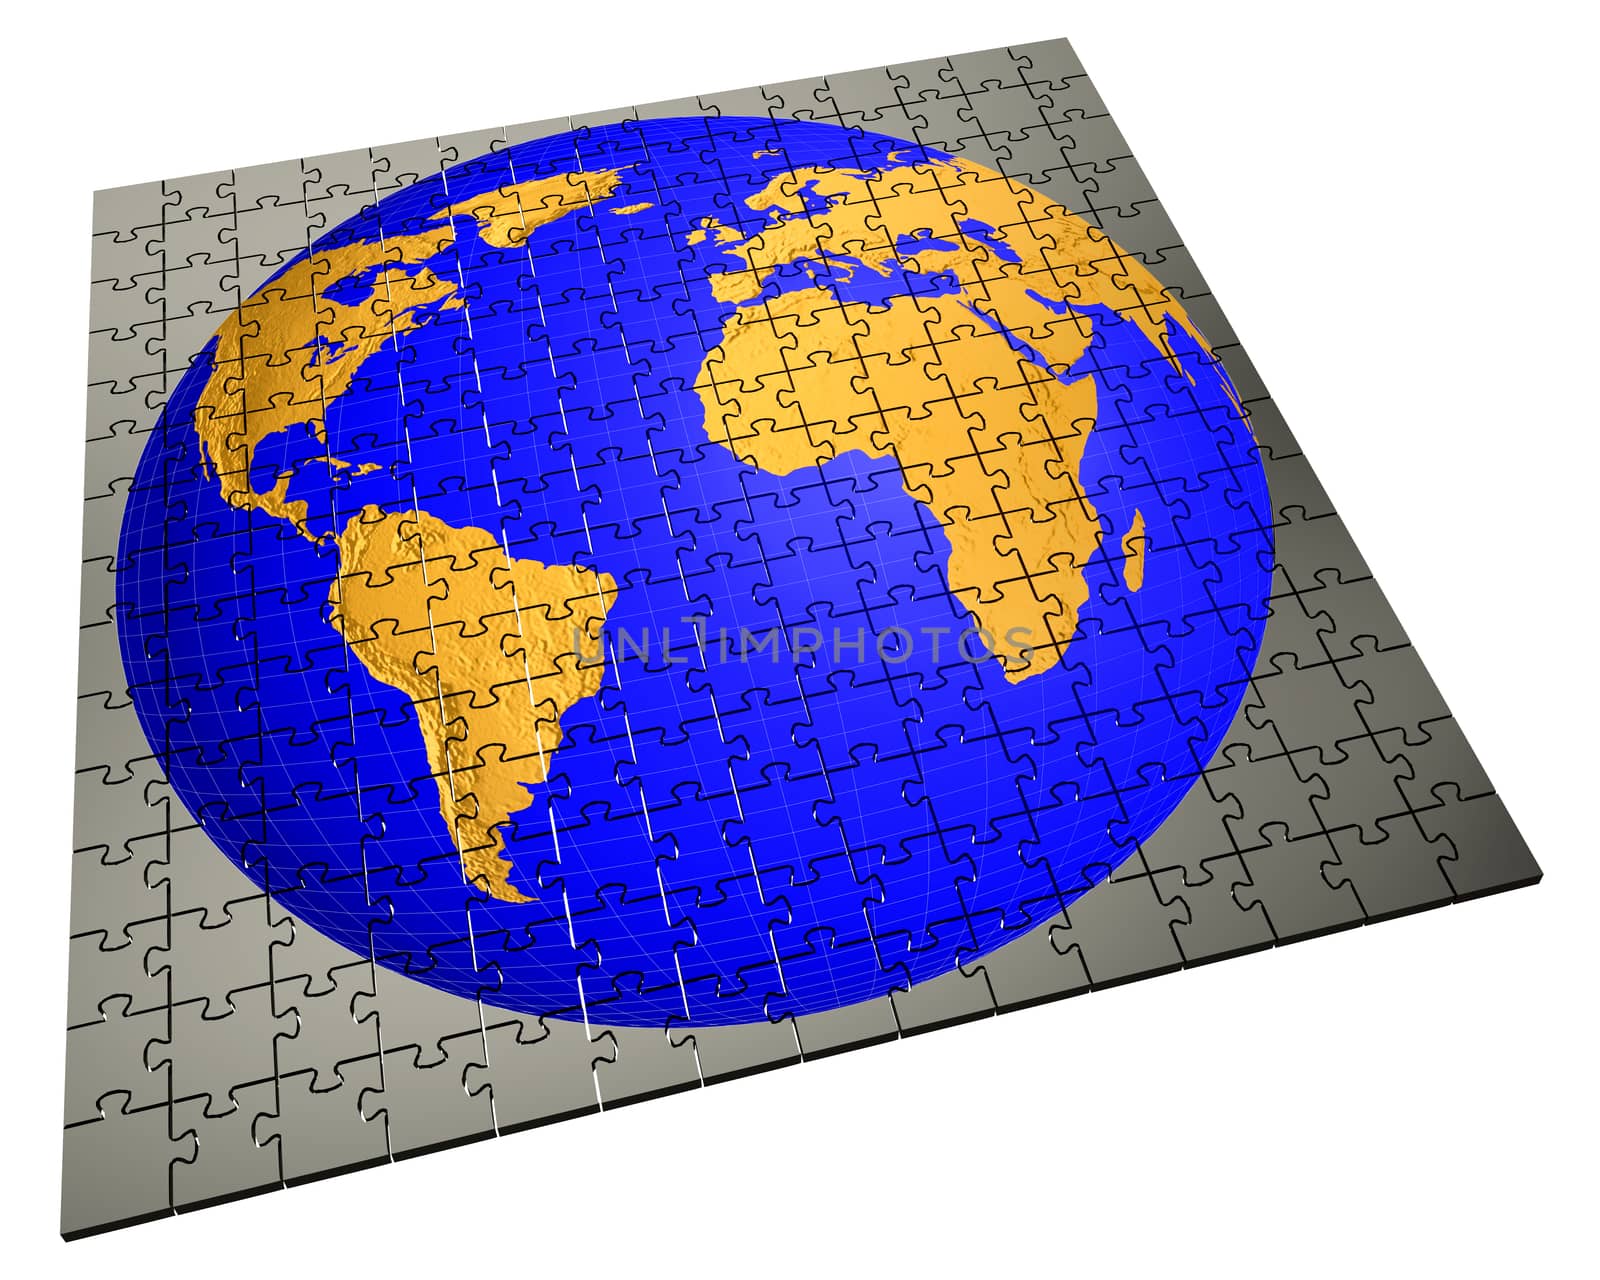 Global strategy and solution business concept, jigsaw puzzle